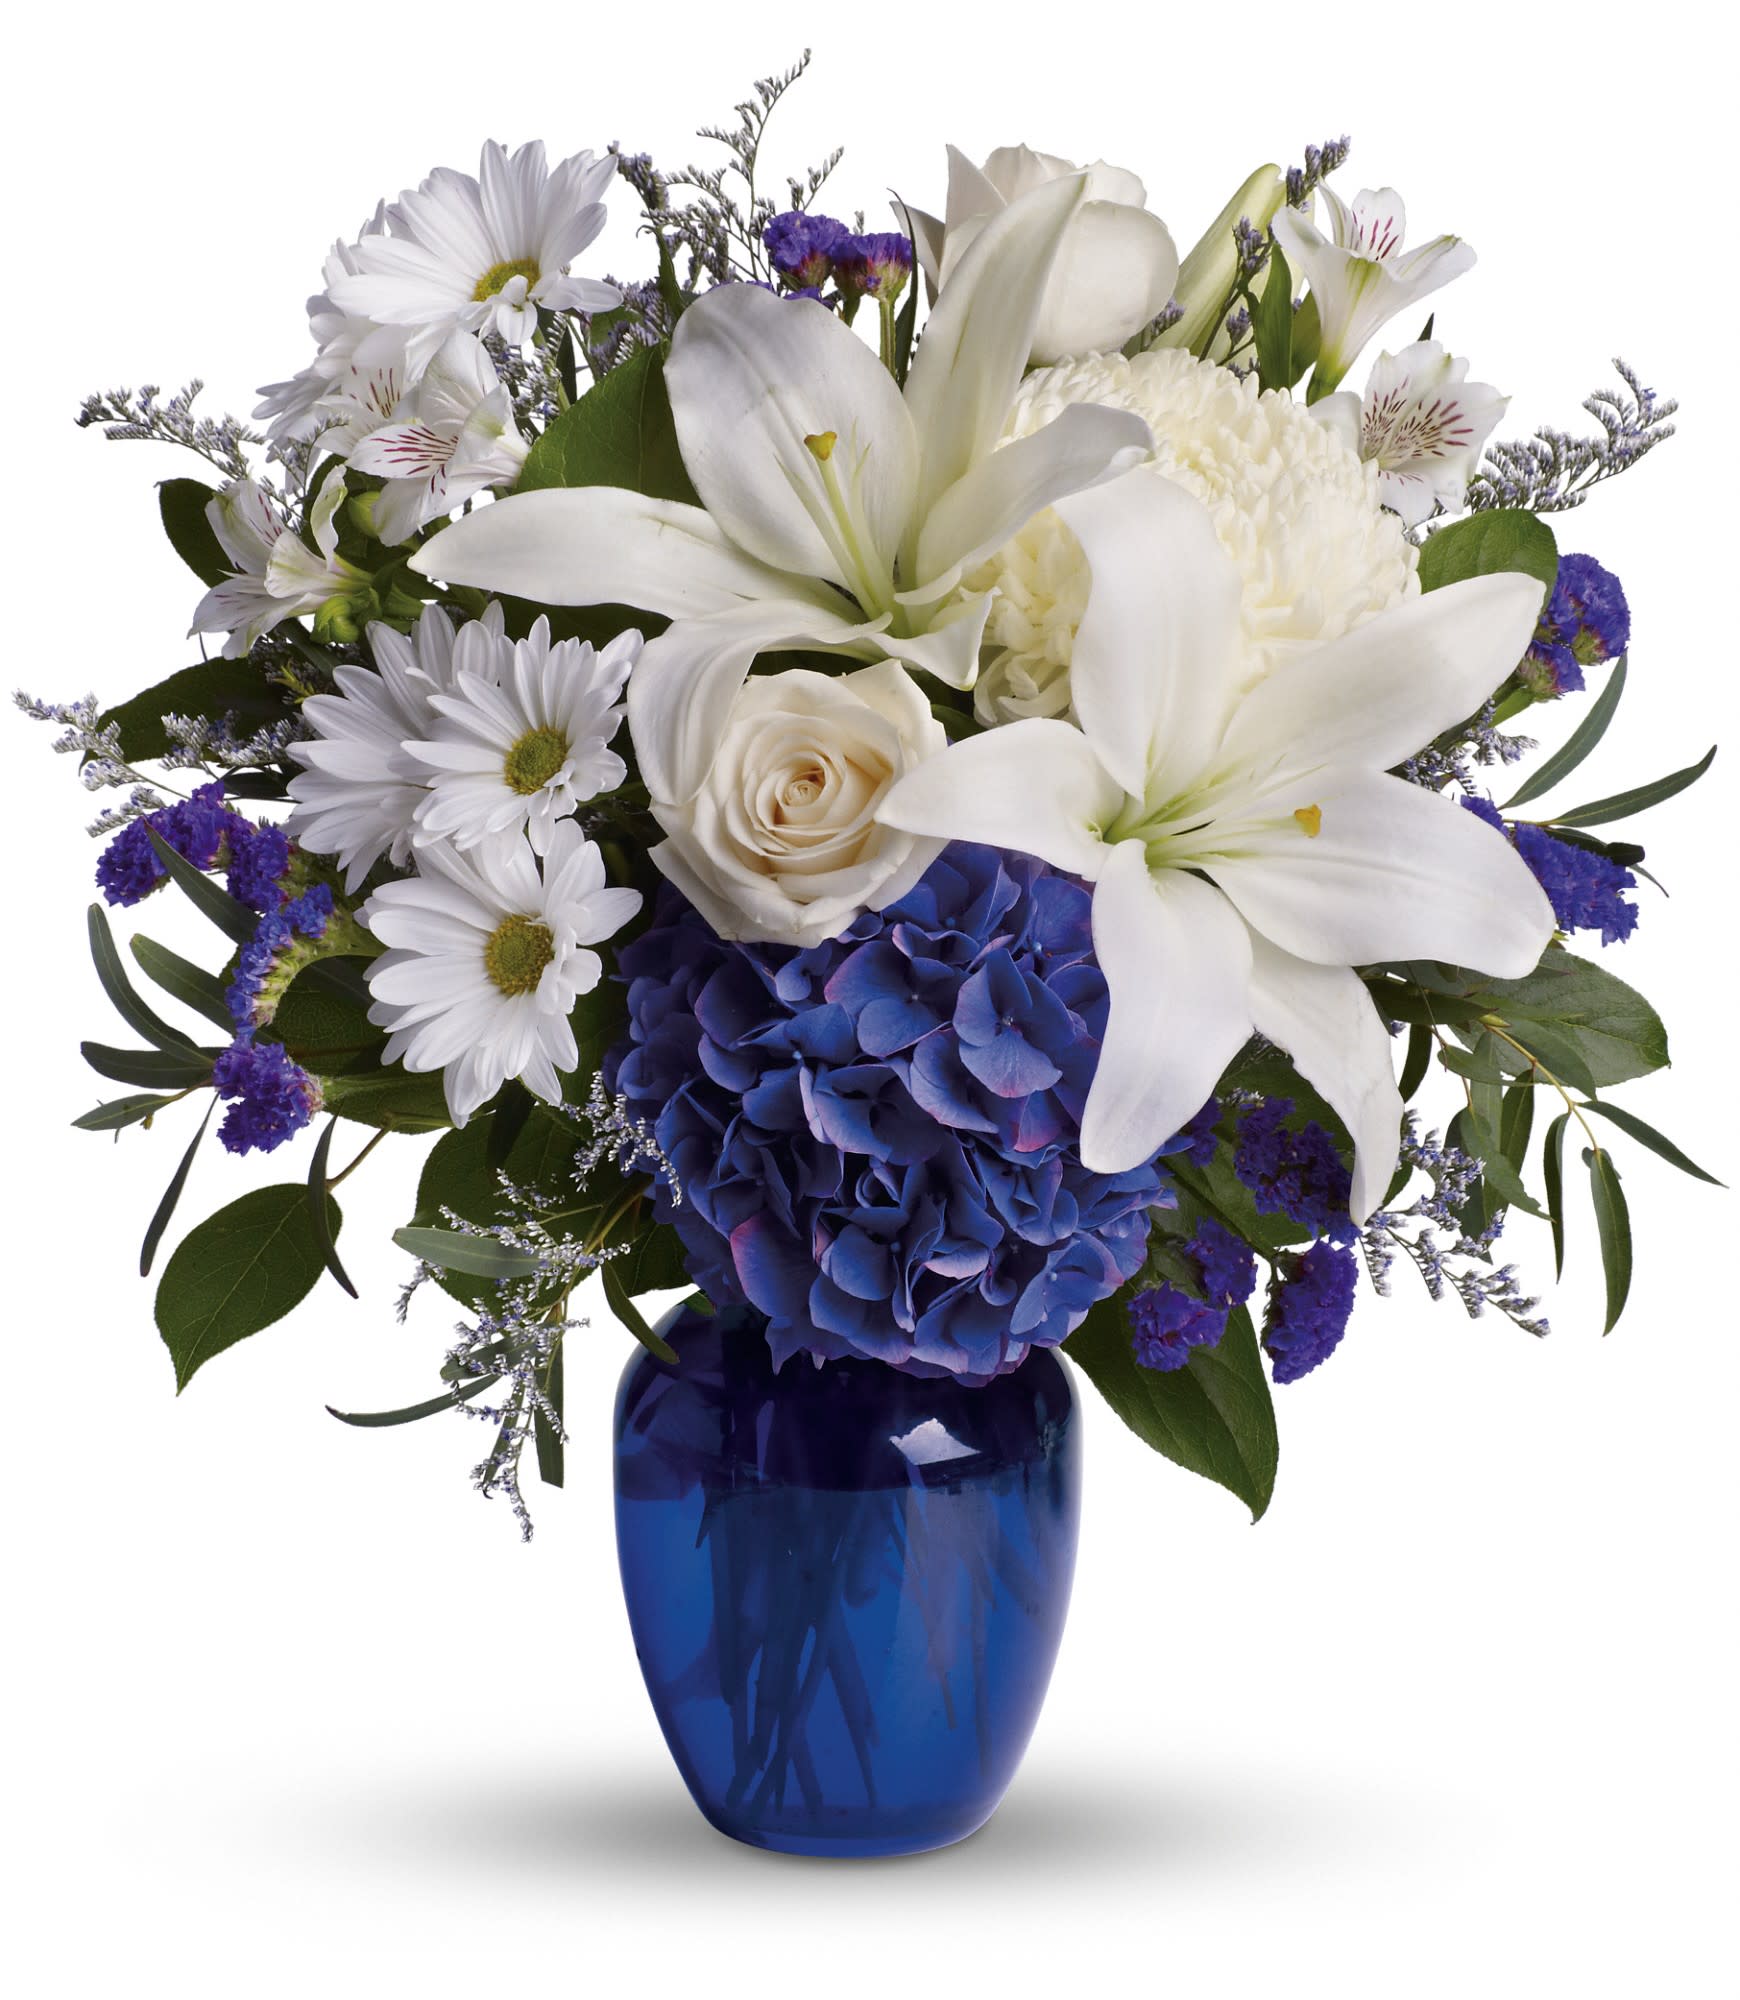 Beautiful in Blue - In this arrangement, the serenity of the color blue along with the purity of intention symbolized by white will let the family know you are sending your calm strength to them during these difficult times. 